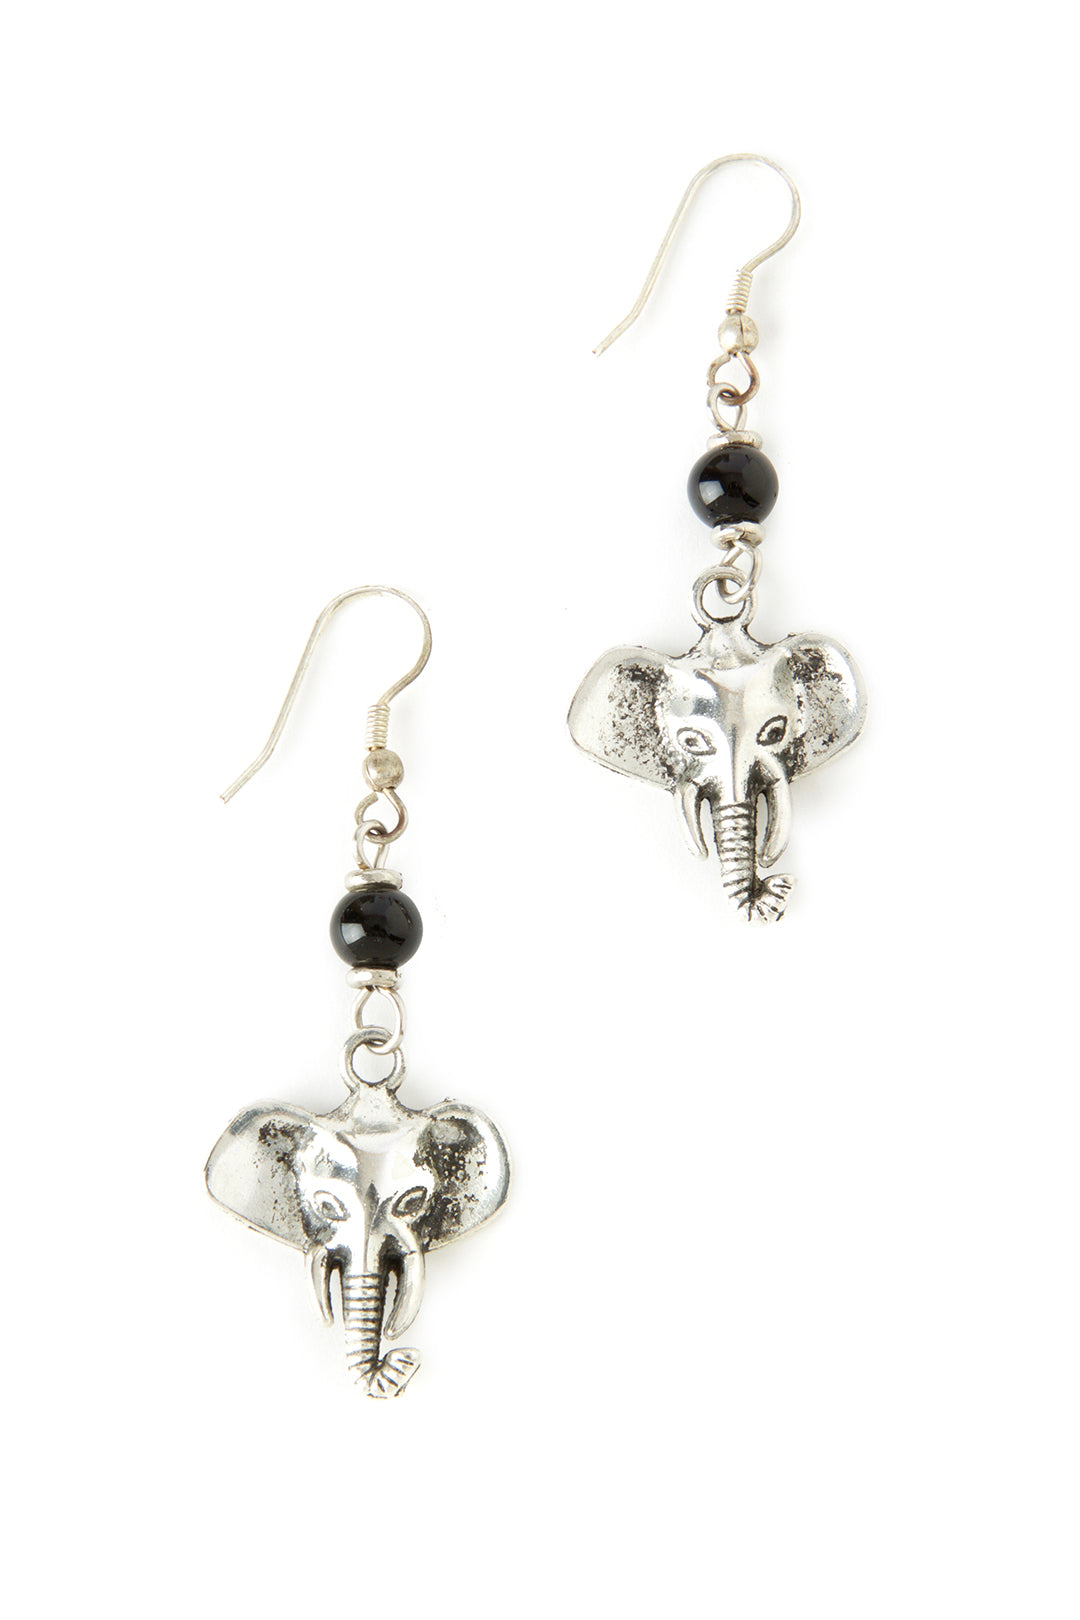 HIDING FOR SPACE Lightweight African Elephant Earrings Lightweight African Elephant Earrings